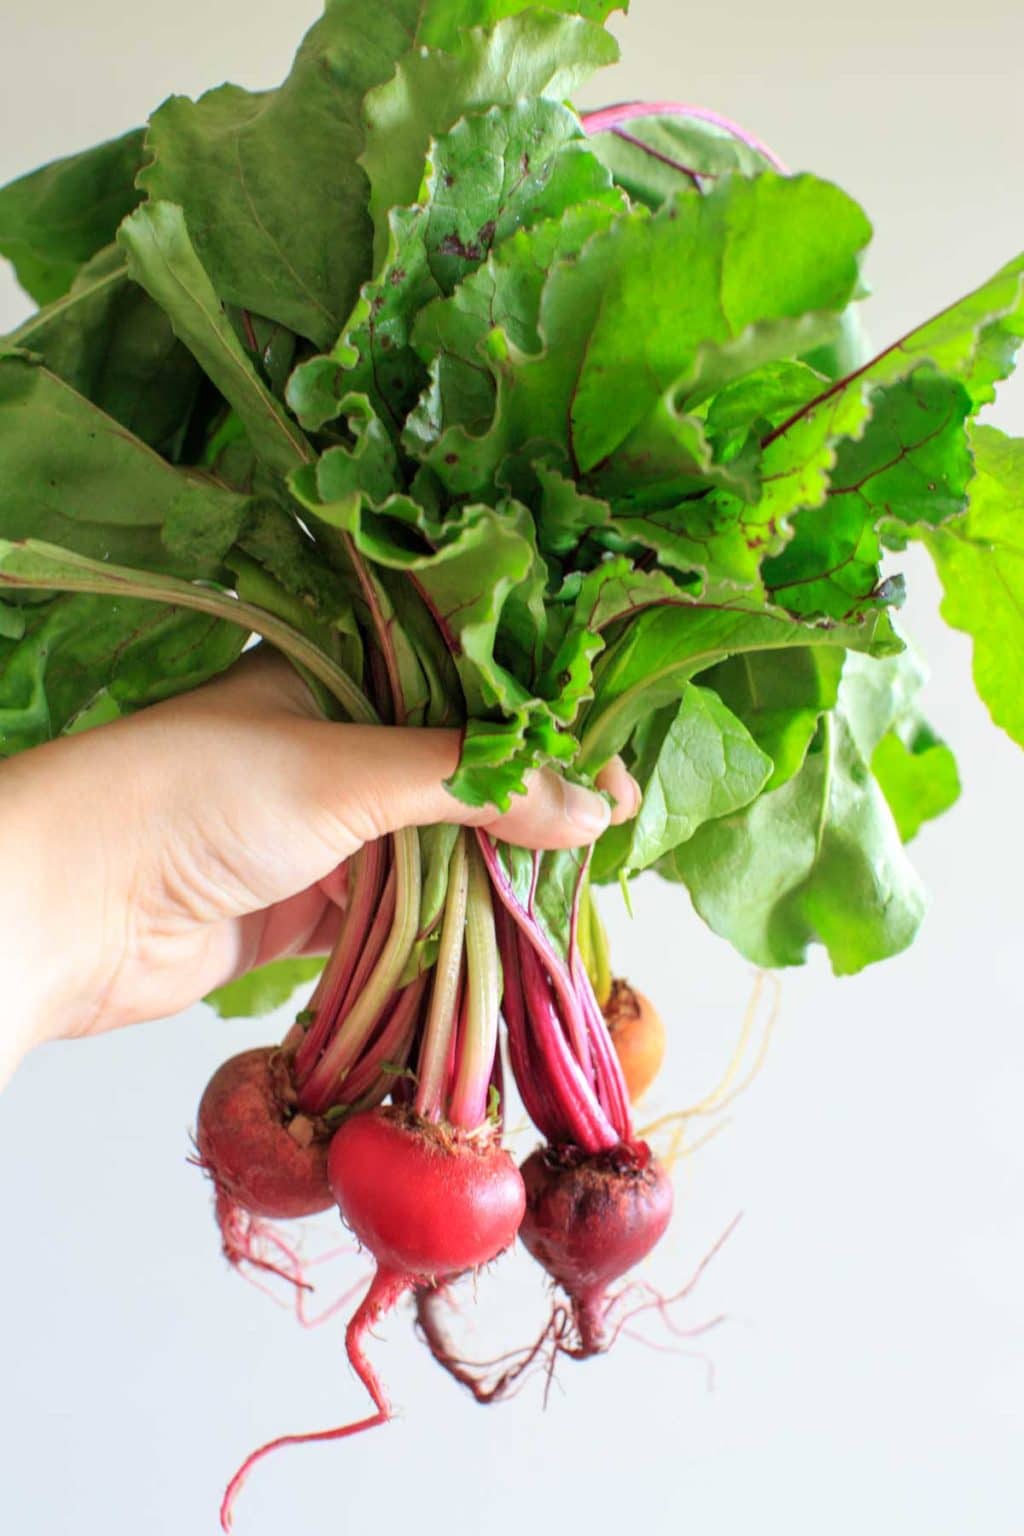 Produce from Peaceful River Farm - baby beets